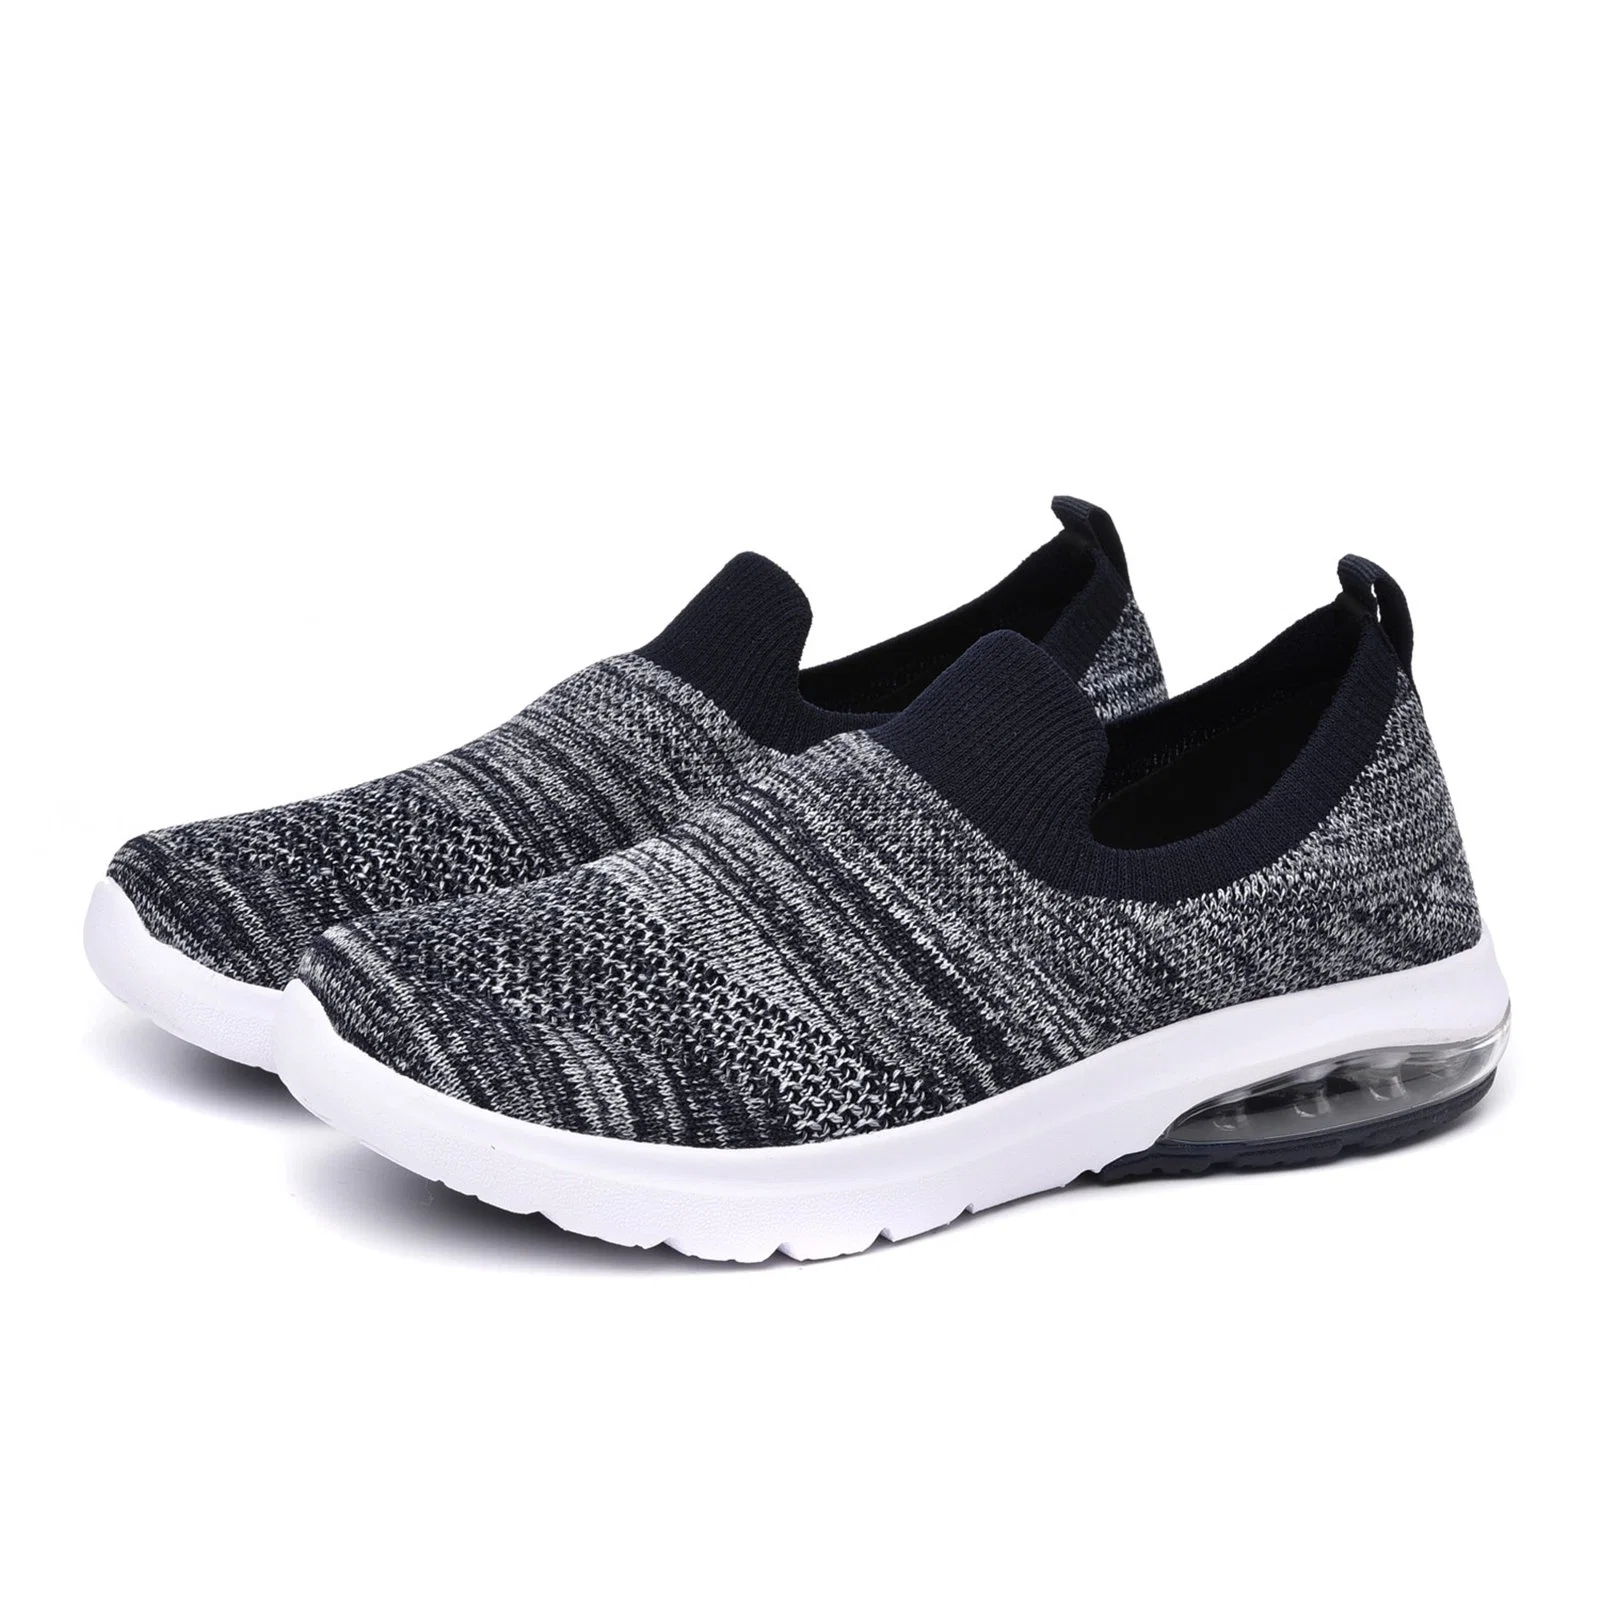 Leisure Sport Running Shoes Women Own Brand Casual Sneakers Shoes